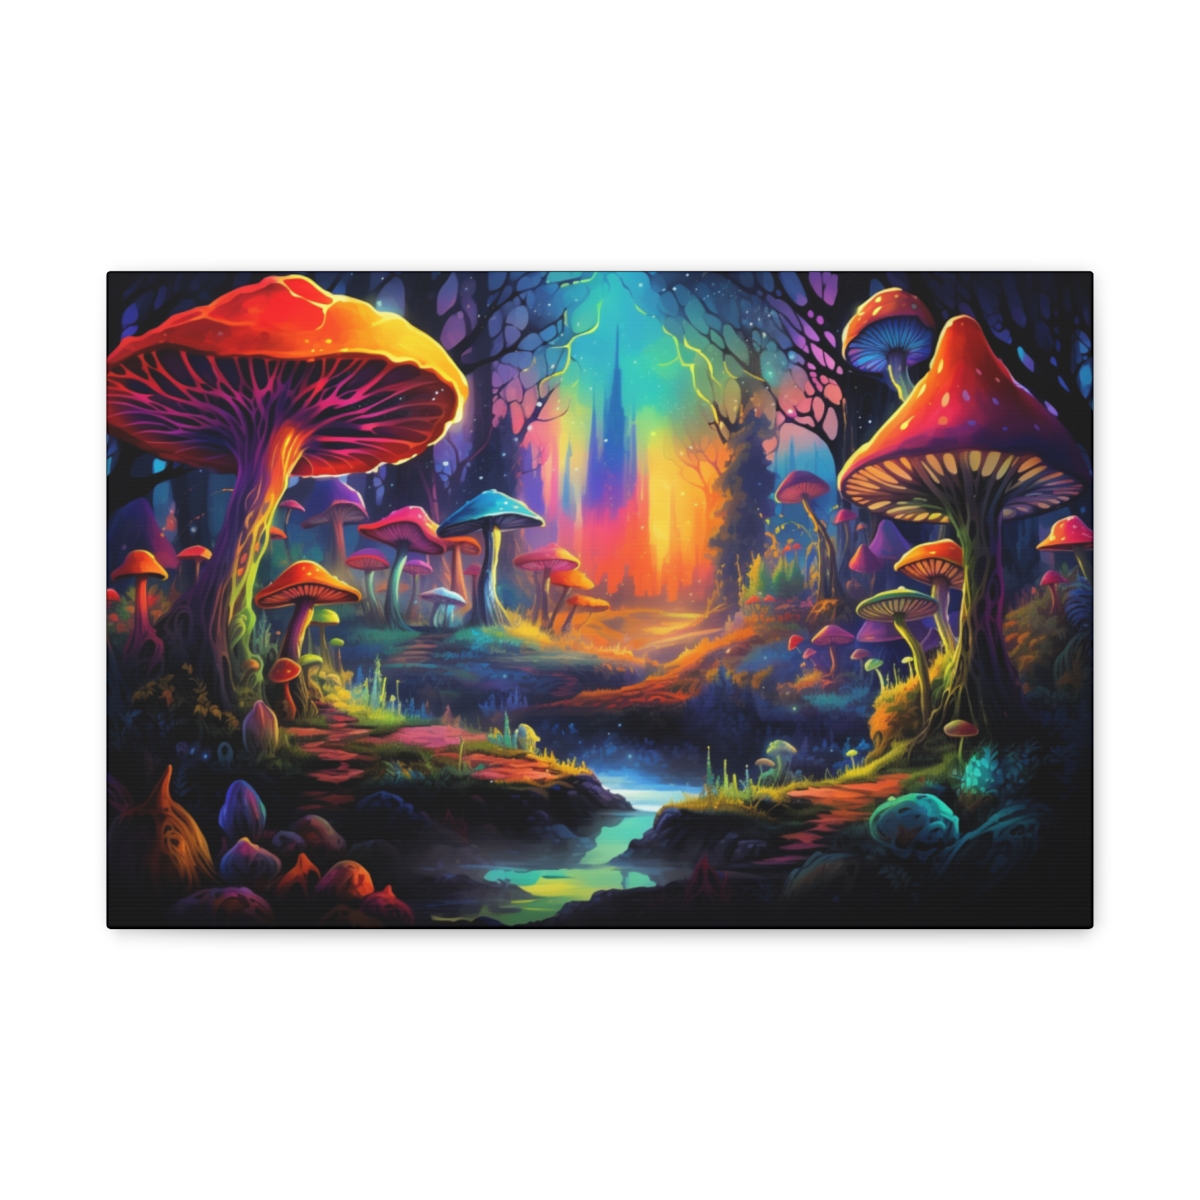 Psychedelic Mushroom Art Canvas Print: Forest Of Magic